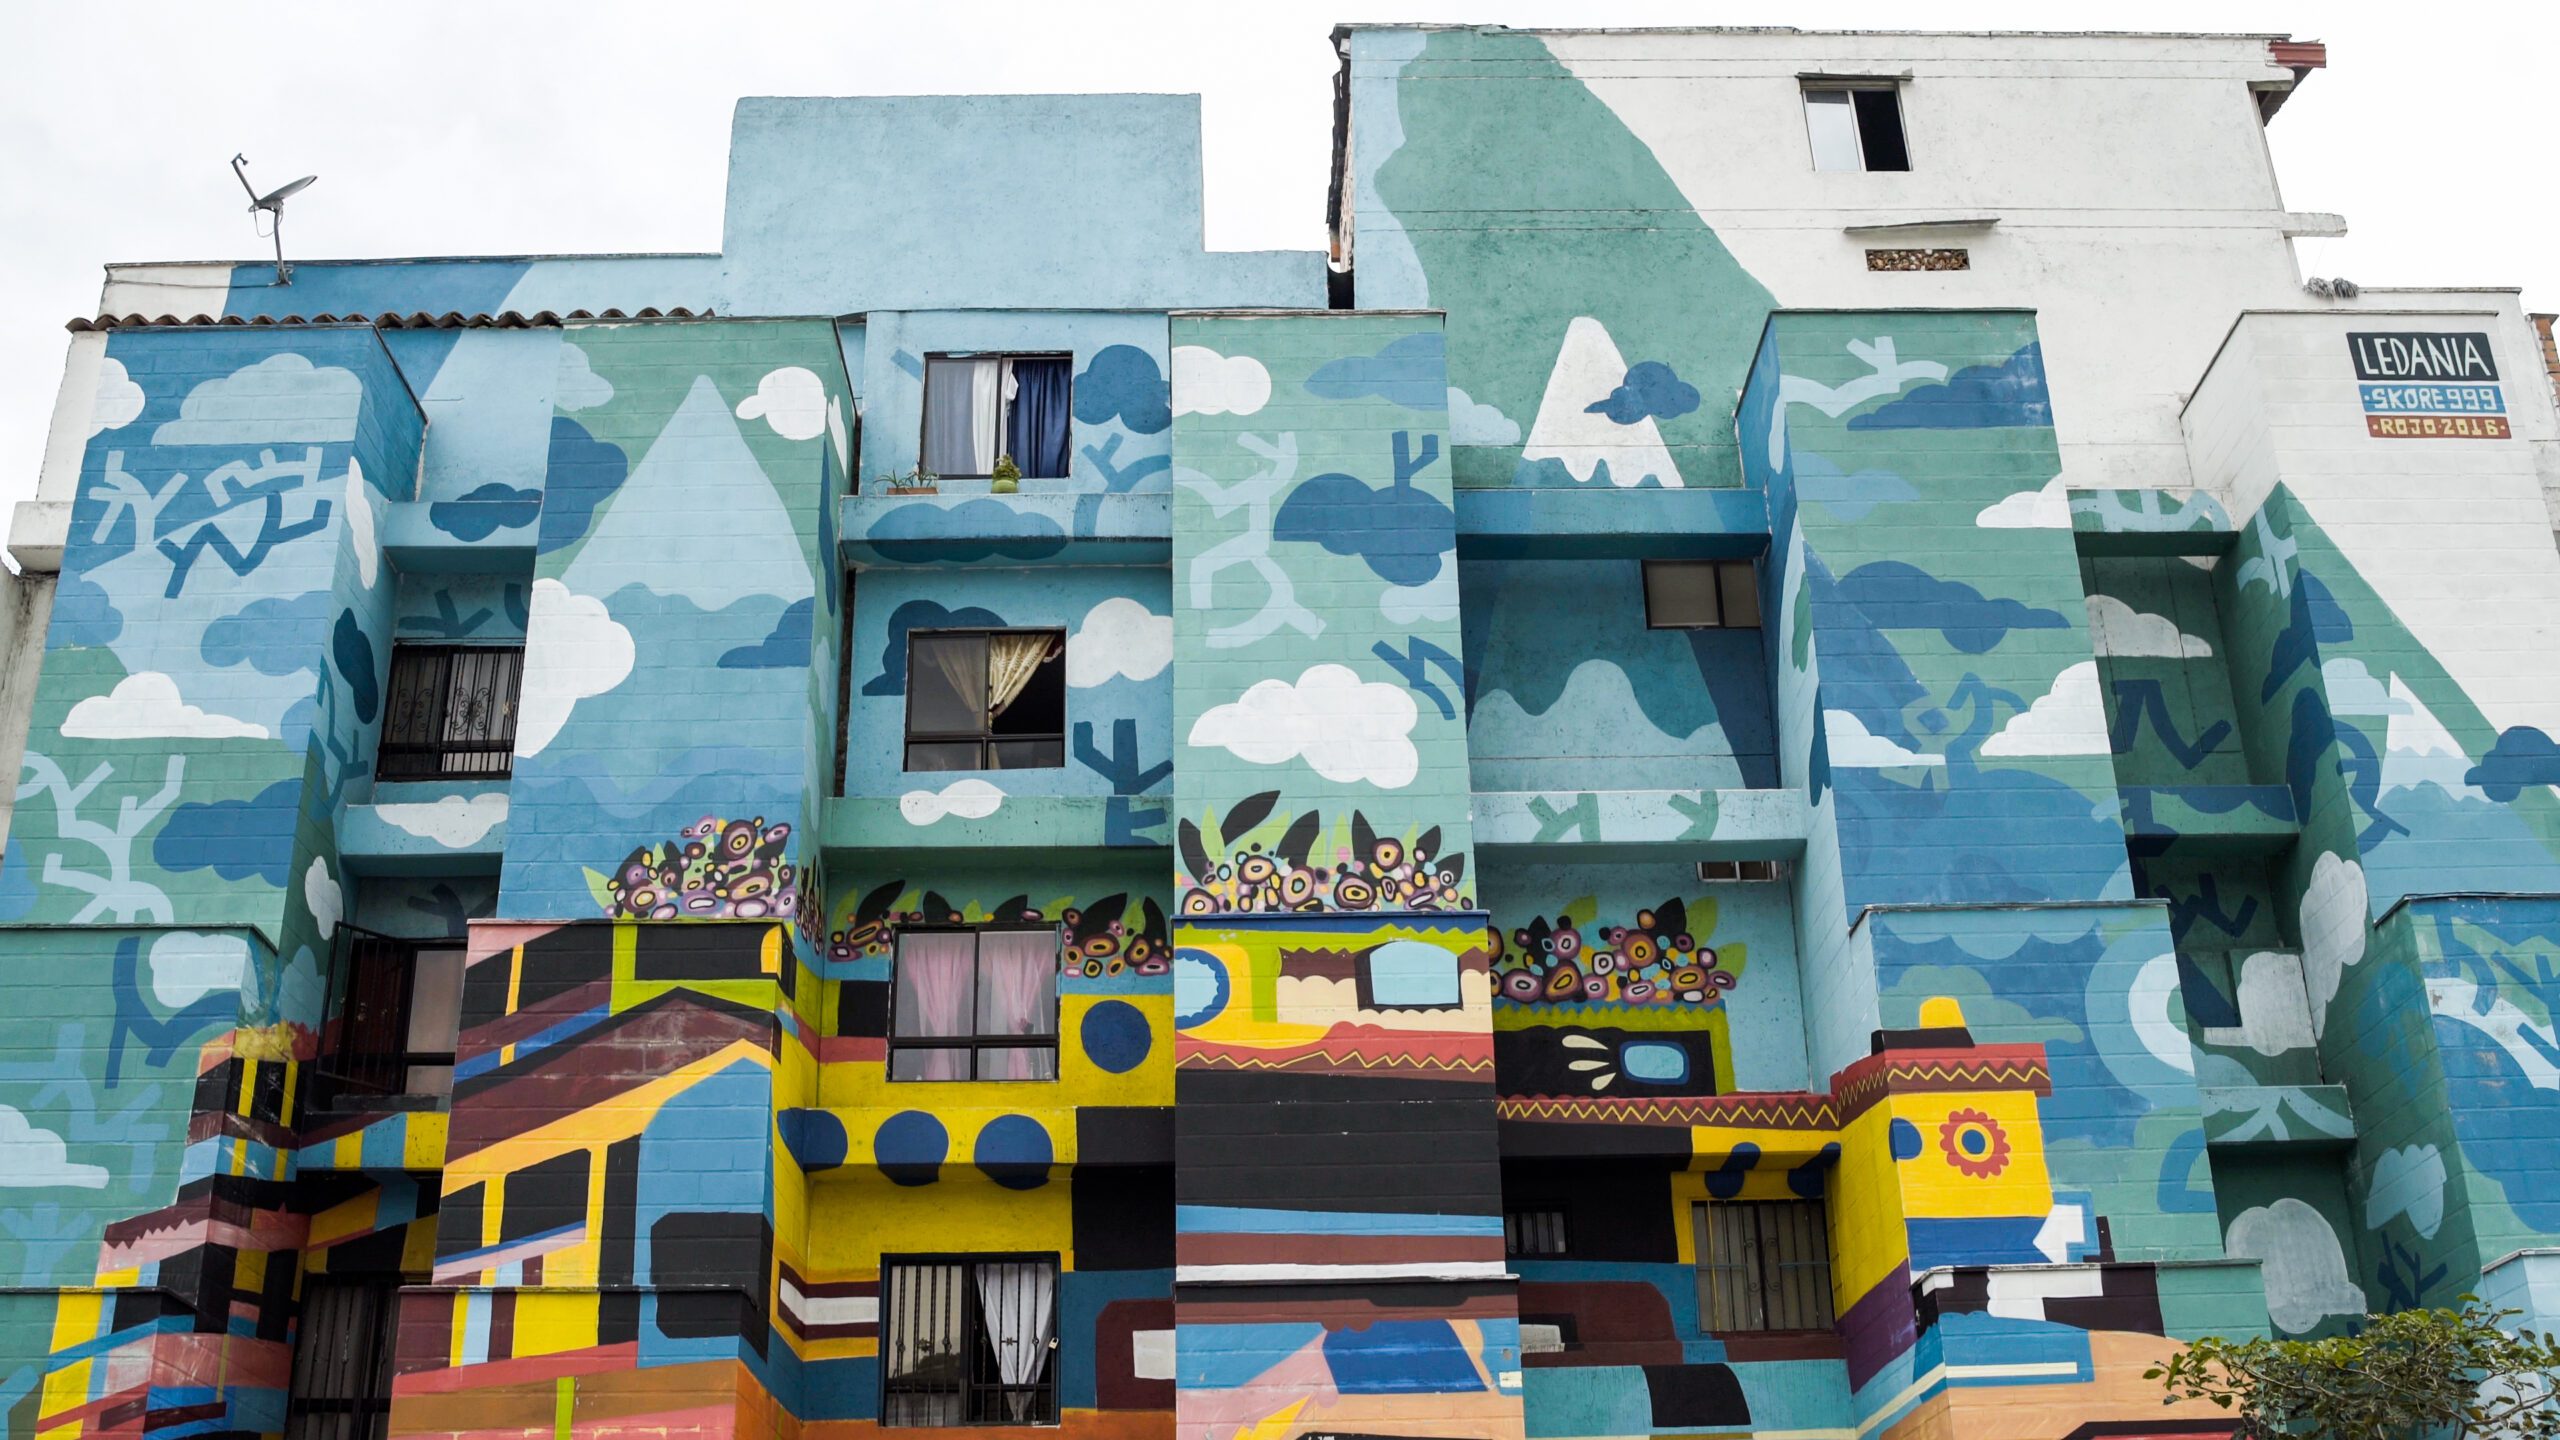 a multicolored building with a mural on the side of it.